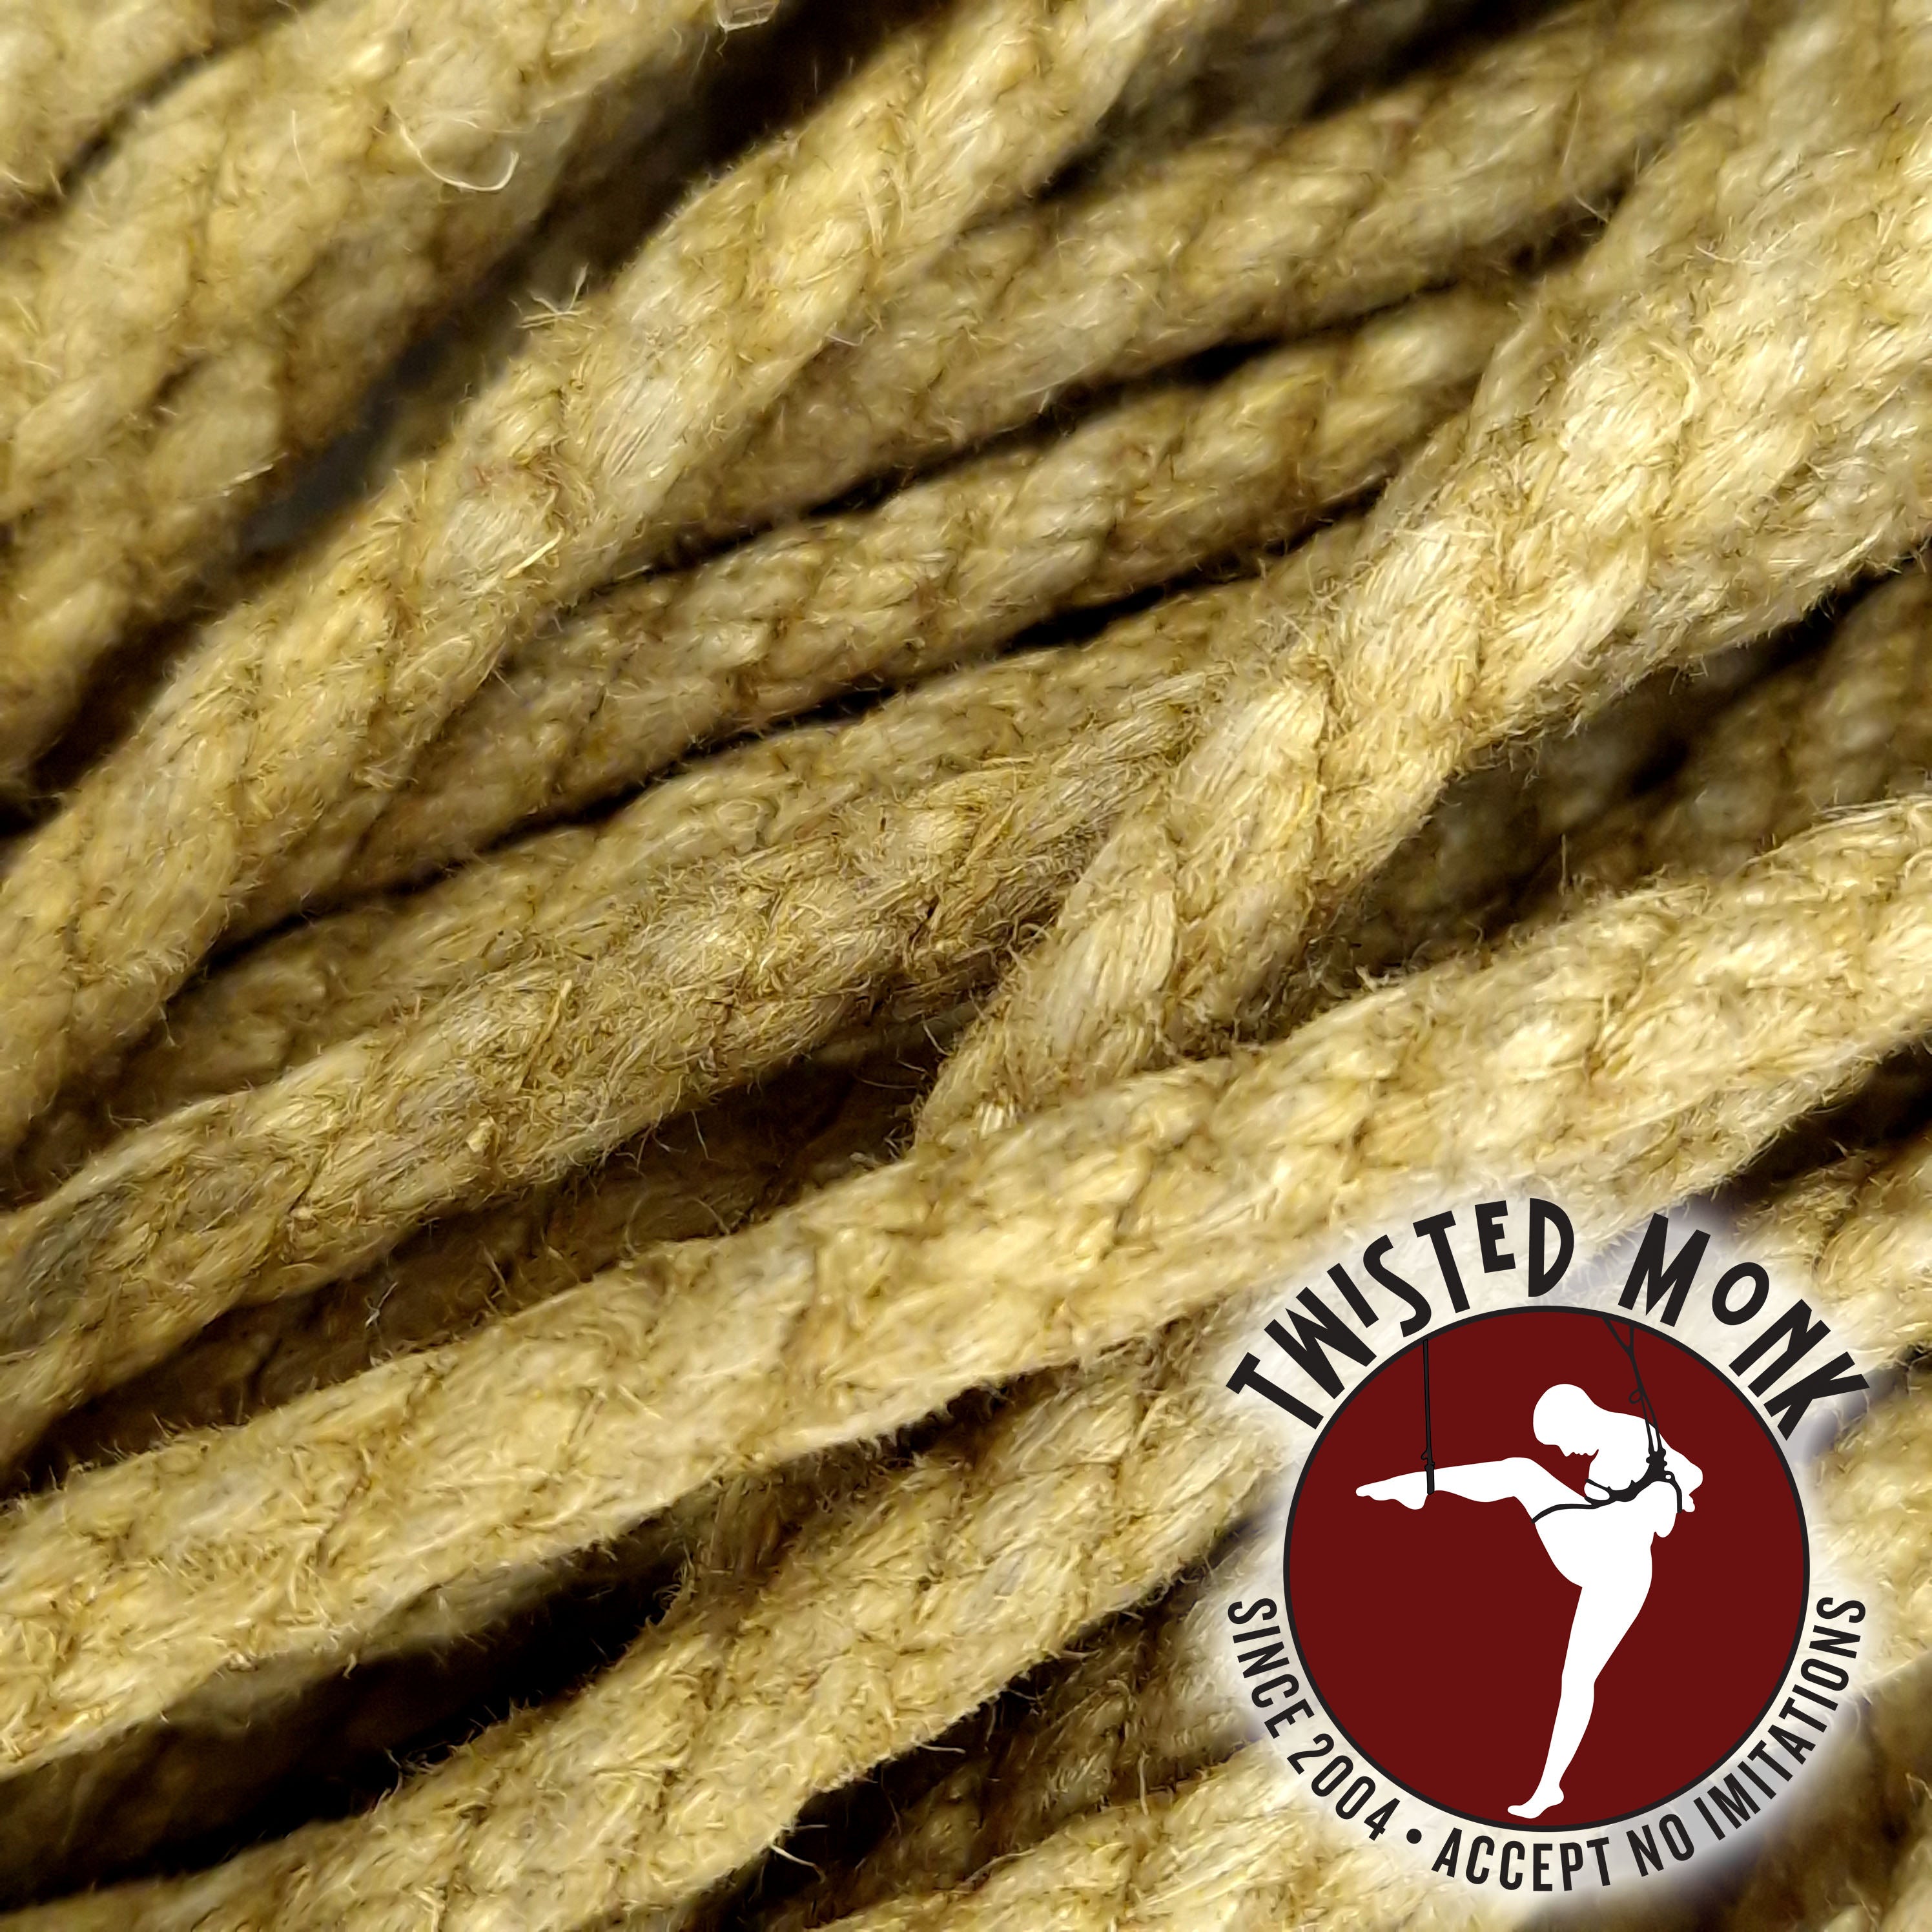 Ravenox Twisted True Hemp Rope | (1/8 in x 3000 ft)(Tan) | USA Made Real  Hemp Cord | Natural Fiber Ropes and Twine for Cat Trees, Pet Toys, Macrame